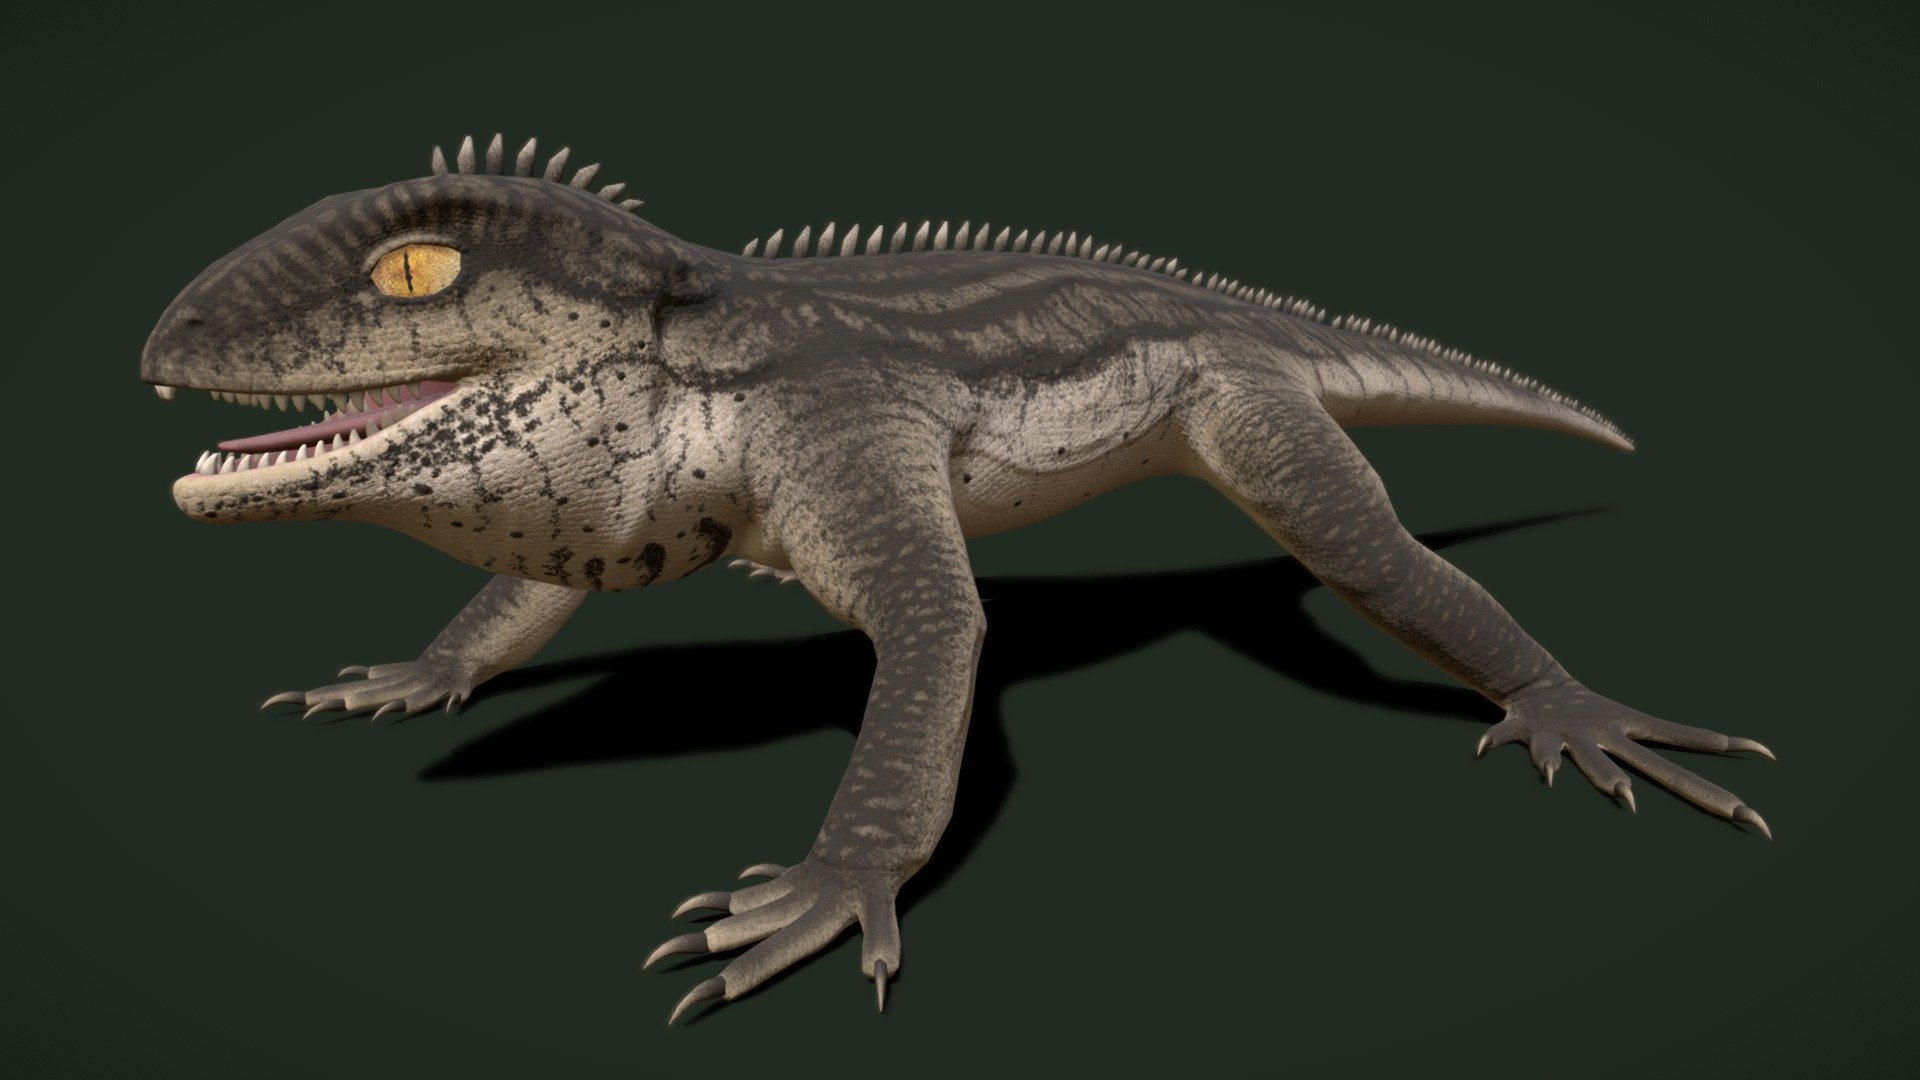 Brachyrhinodon is an extinct genus of sphenodontian from the Late Triassic Lossiemouth Sandstone of Scotland. It is related to the tuatara, the only member of its order that is not extinct. I worked closely with paleontologists to create this.

Renders and more on my Artstation: https://www.artstation.com/artwork/ZG1AAZ - Brachyrhinodon - 3D model by Freeflier 3d model